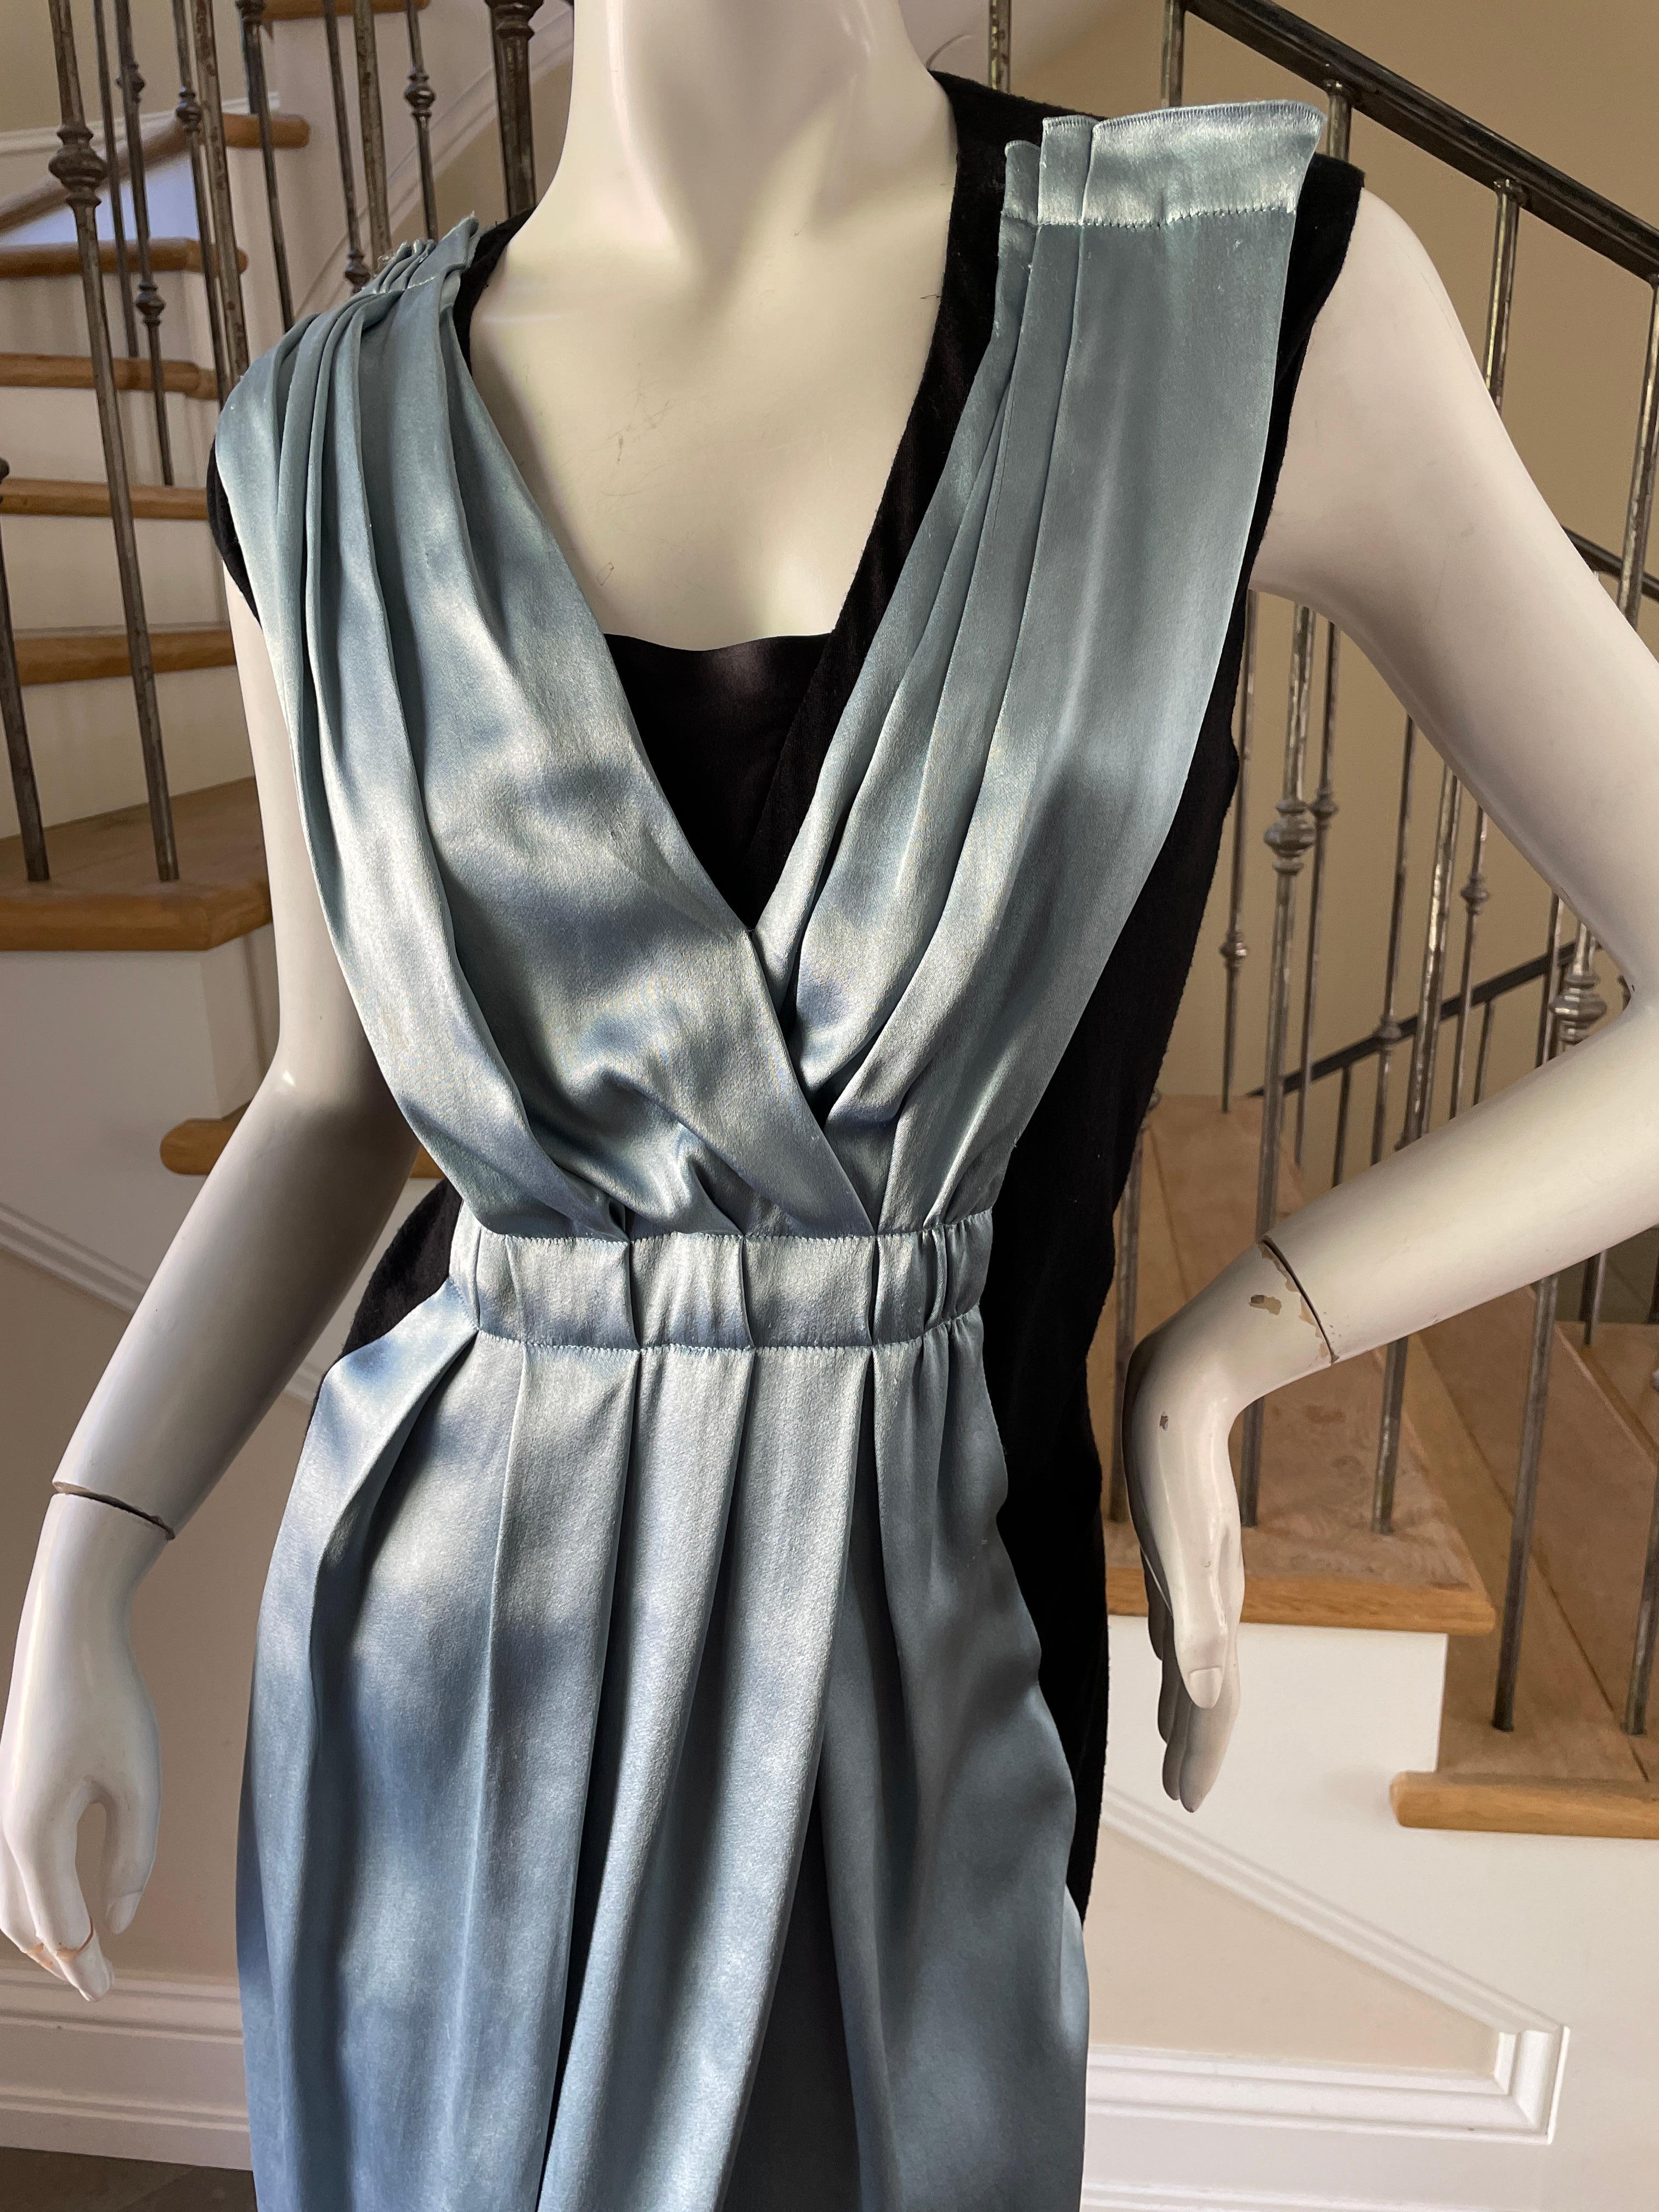 Lanvin by Alber Elbaz Black Dress with Blue Silk Overlay from Fall 2006 For Sale 1